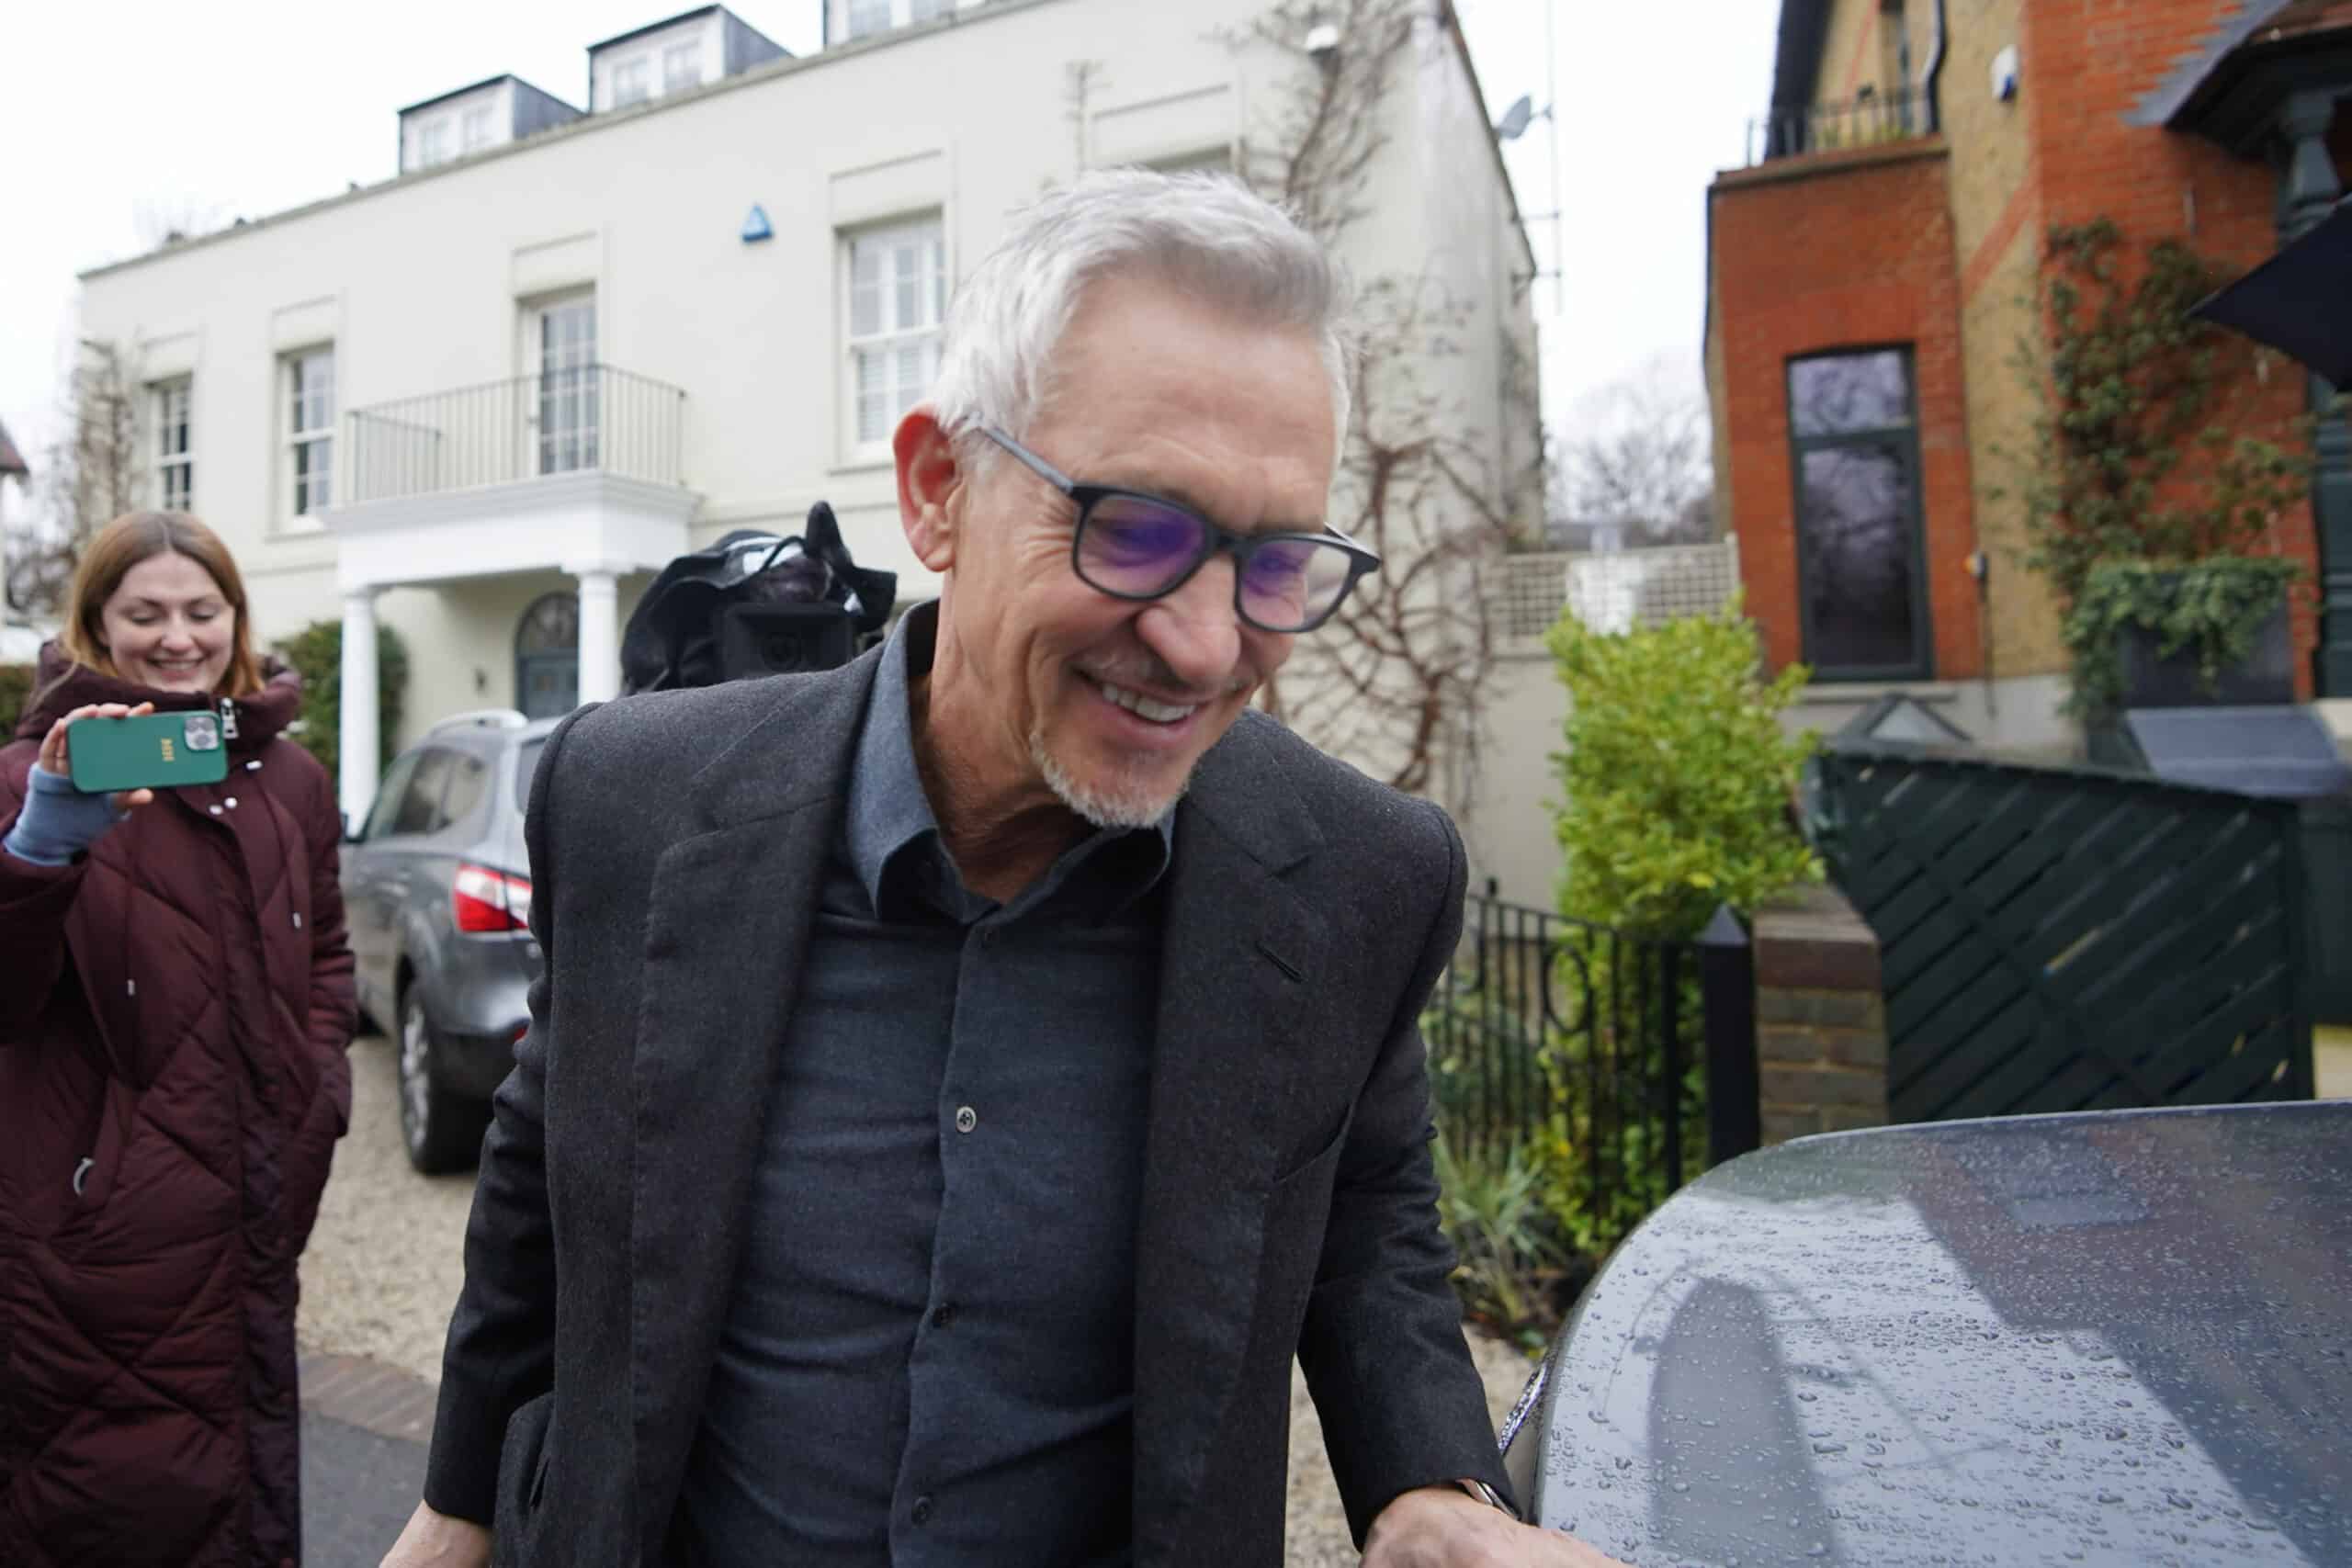 Gary Lineker to return to hosting Match of the Day